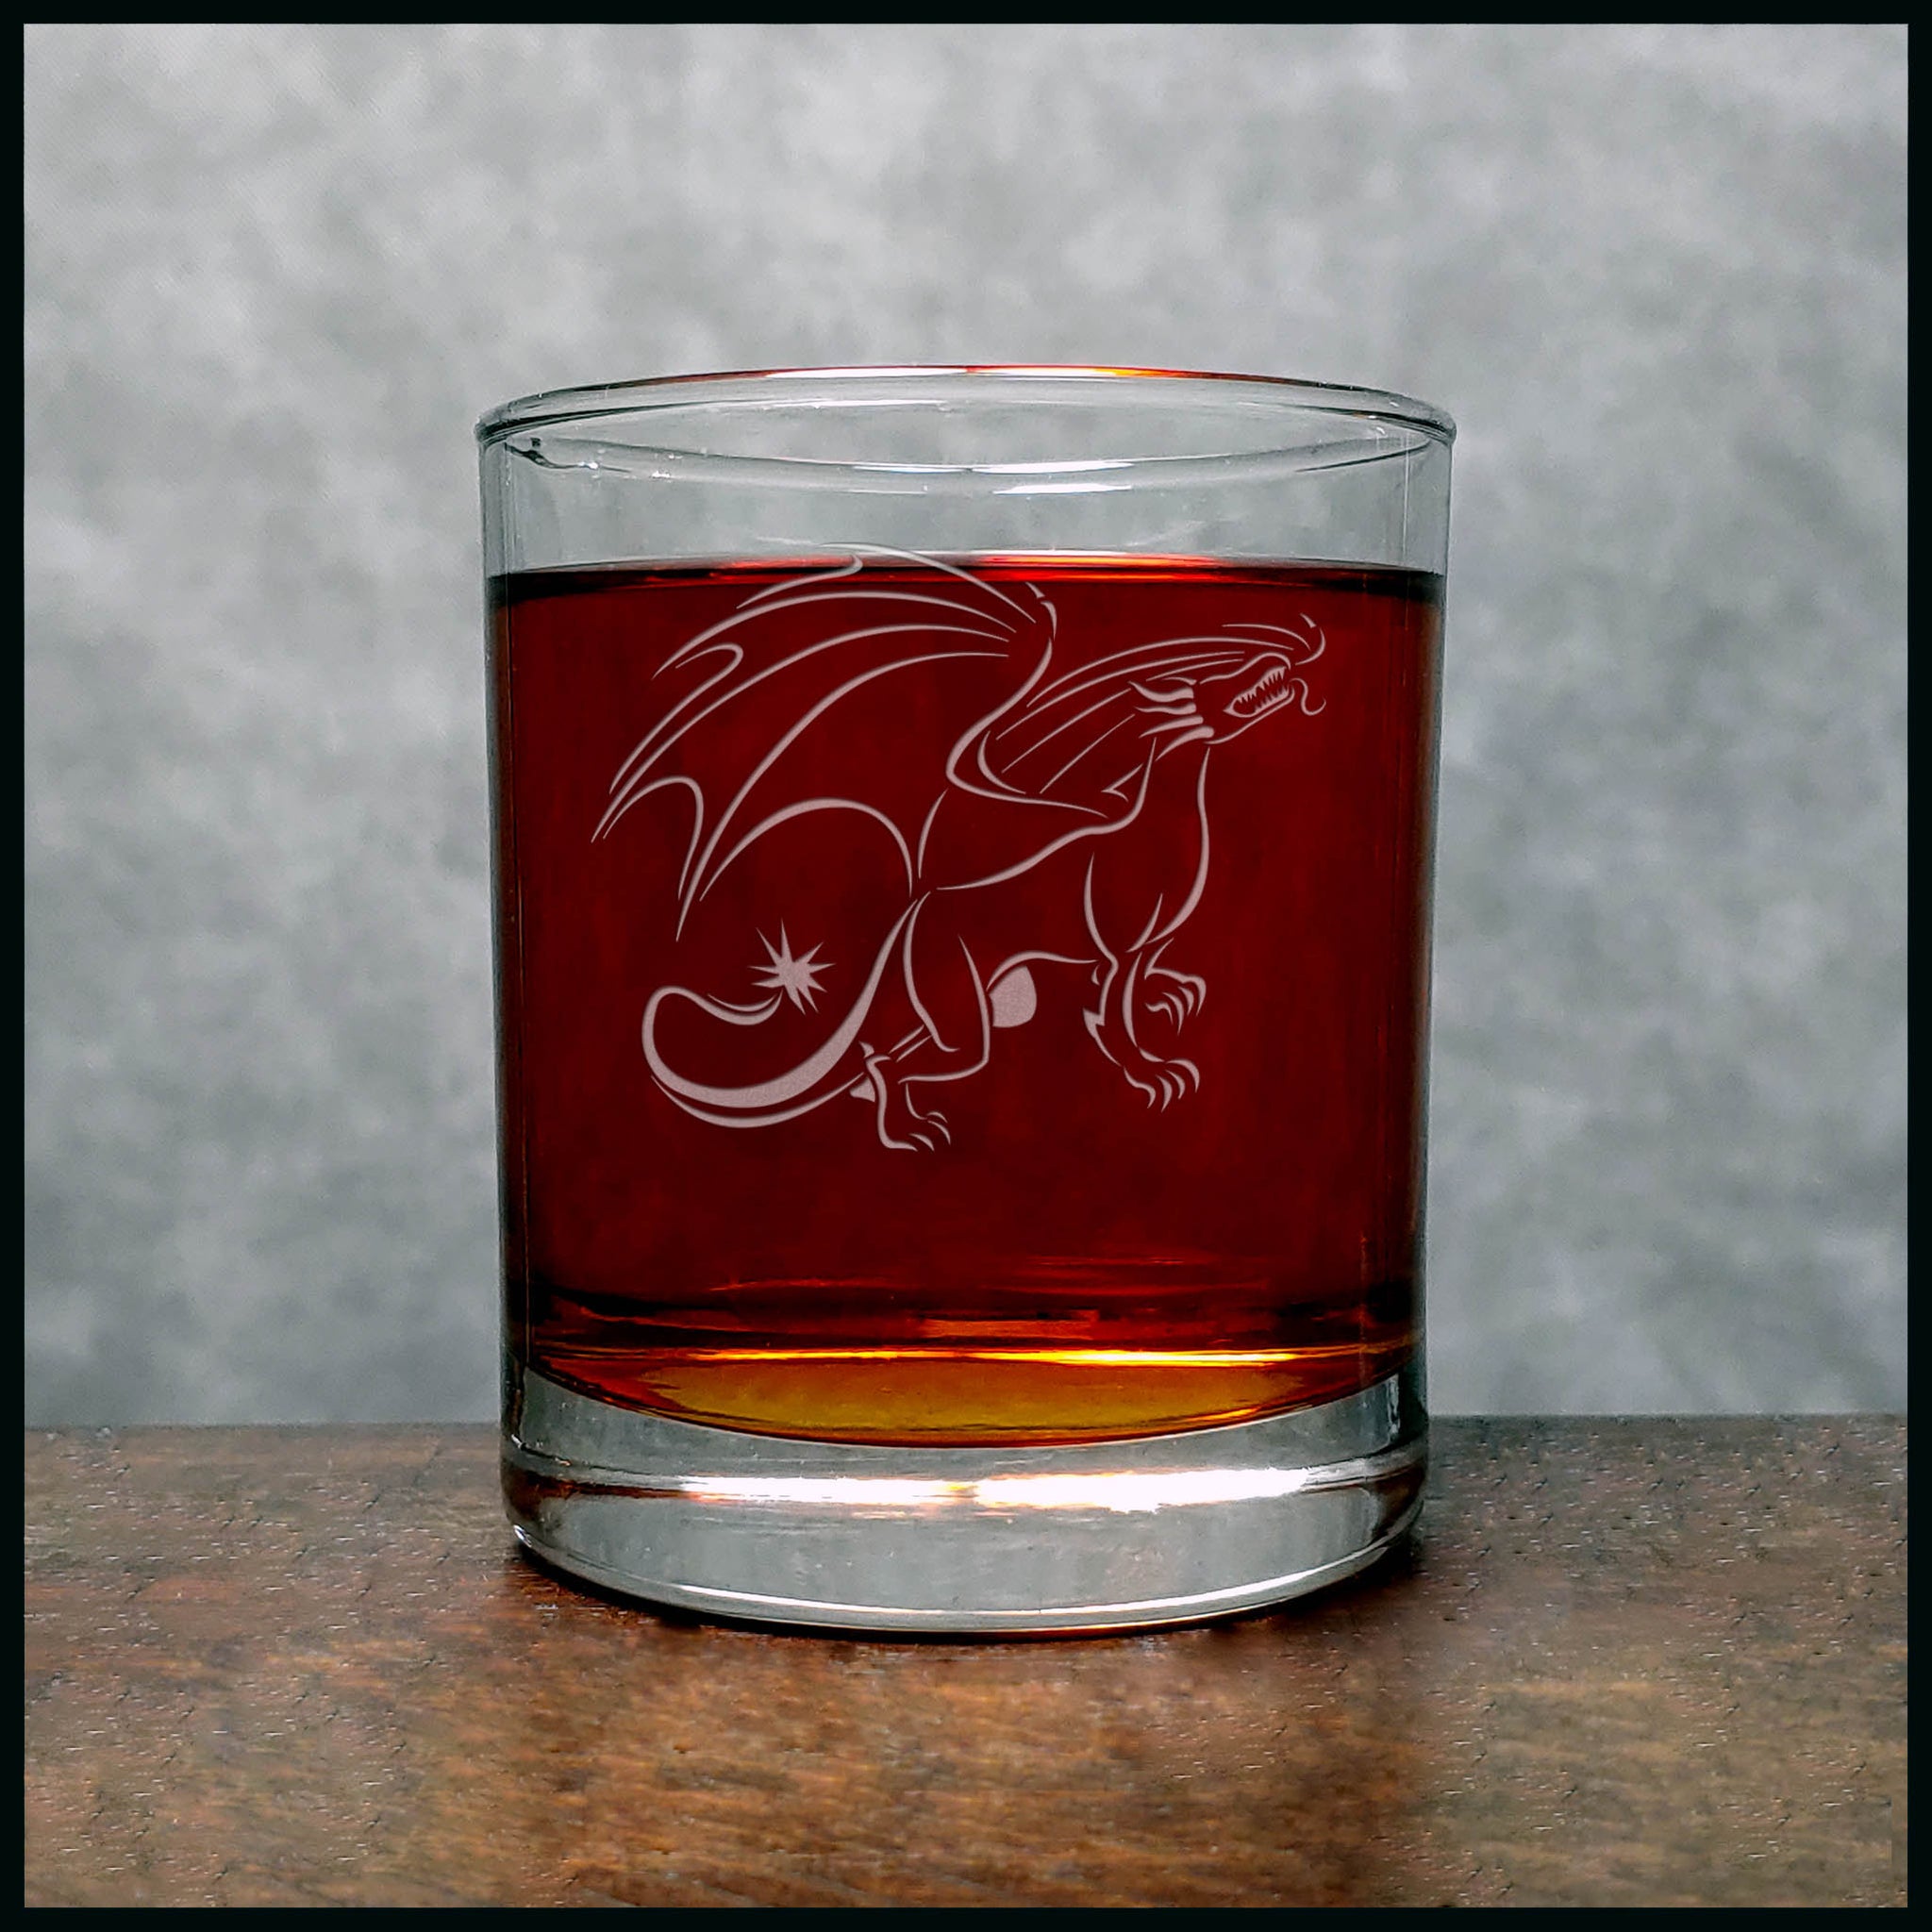 Dragon Personalized Whisky Glass - Design 3 - Copyright Hues in Glass